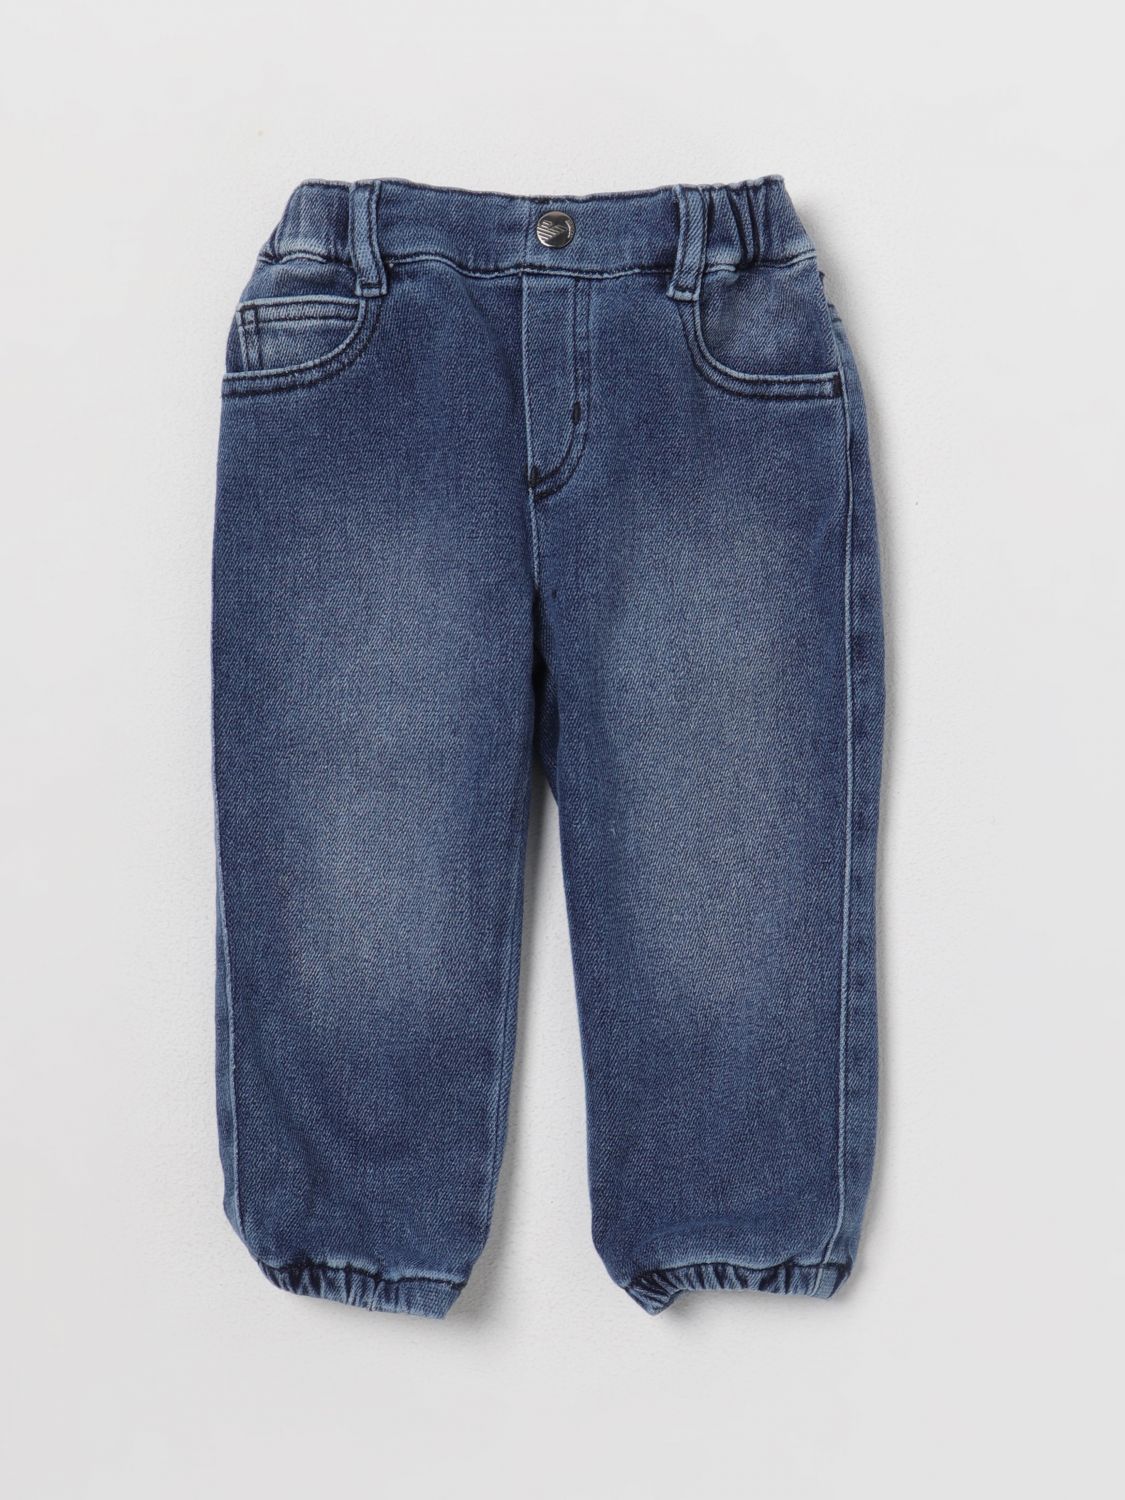 Emporio Armani Babies' Trousers  Kids Kids In Blue